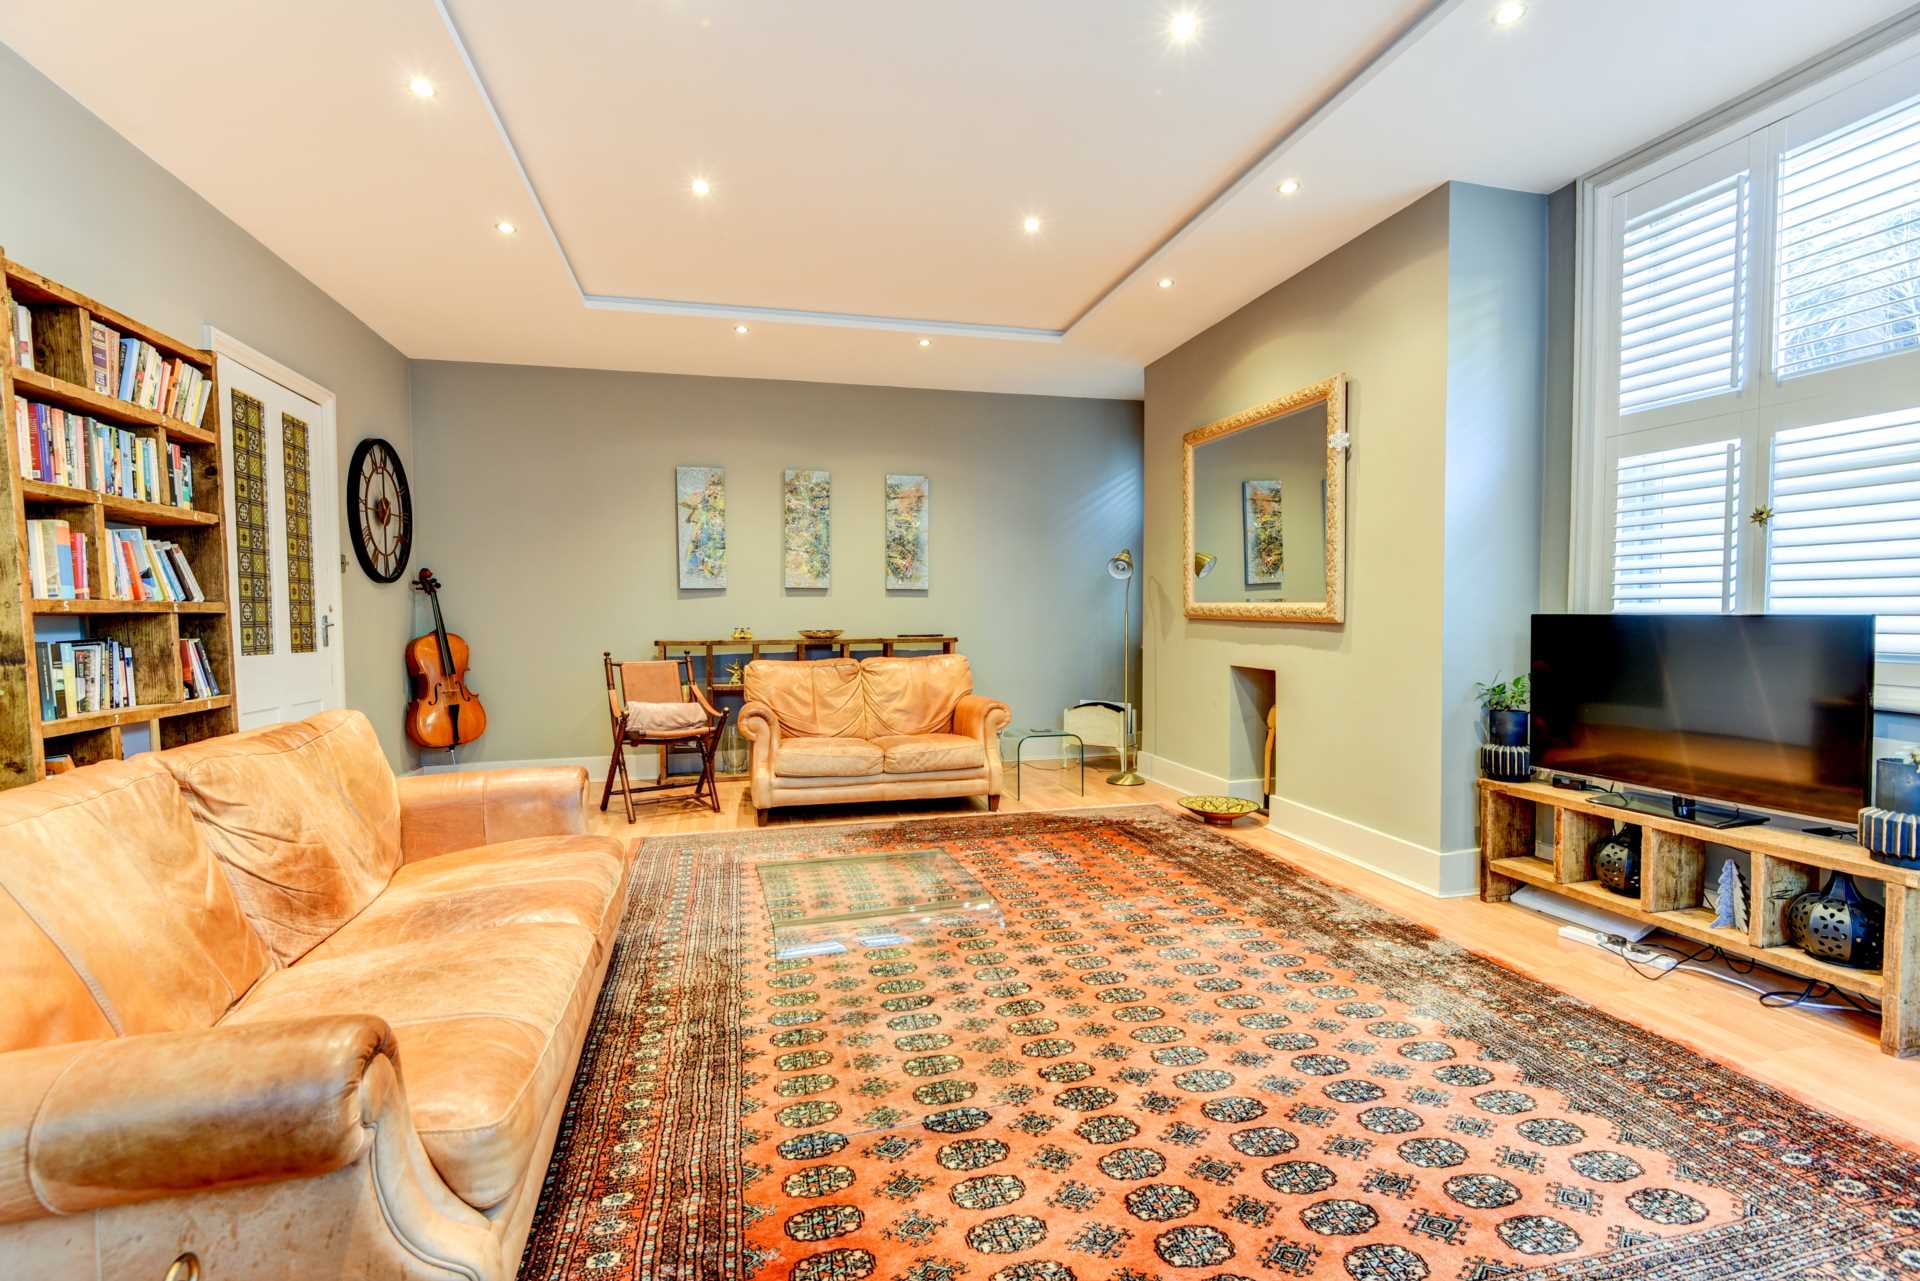 Second Avenue Three Bedroom Apartment Hove with TWO CAR PARKING SPACES. HOLIDAY LET/SHORT LETS DOG FRIENDLY, Image 10